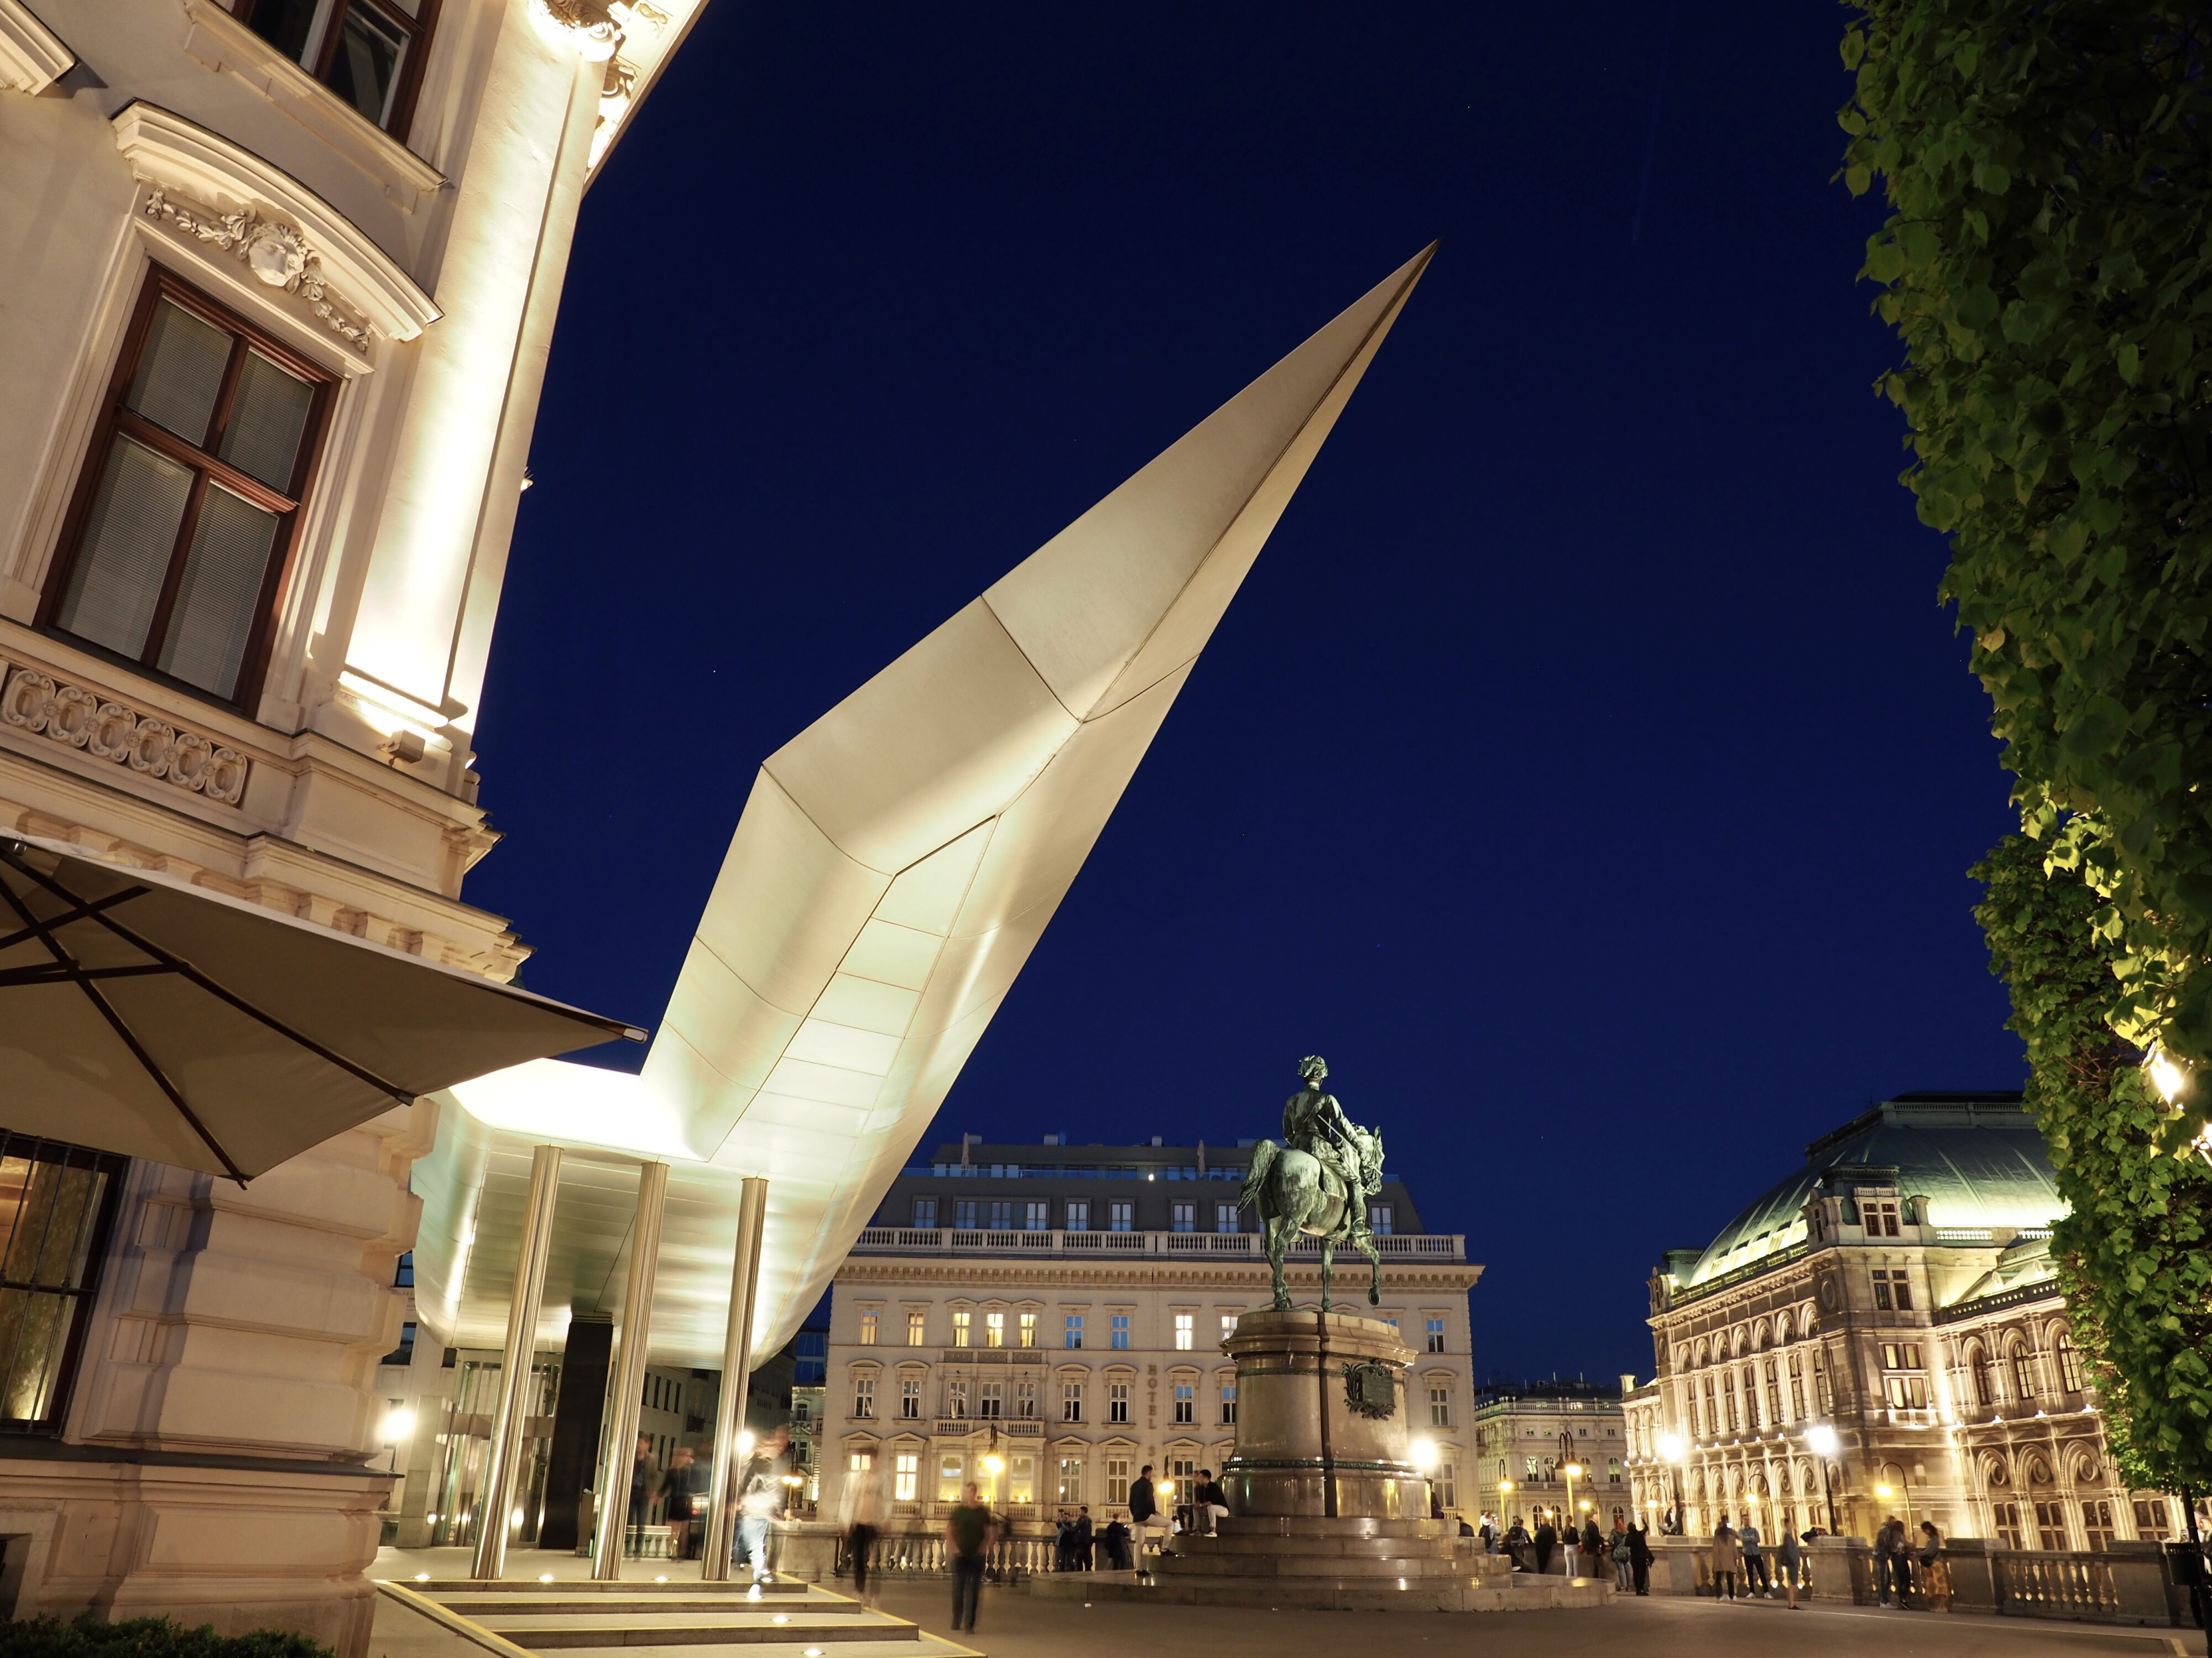 In 2008 The Soravia Wing - a distinctive roof by Hans Hollein was added to the Albertina Museum, located in the First District of Vienna.